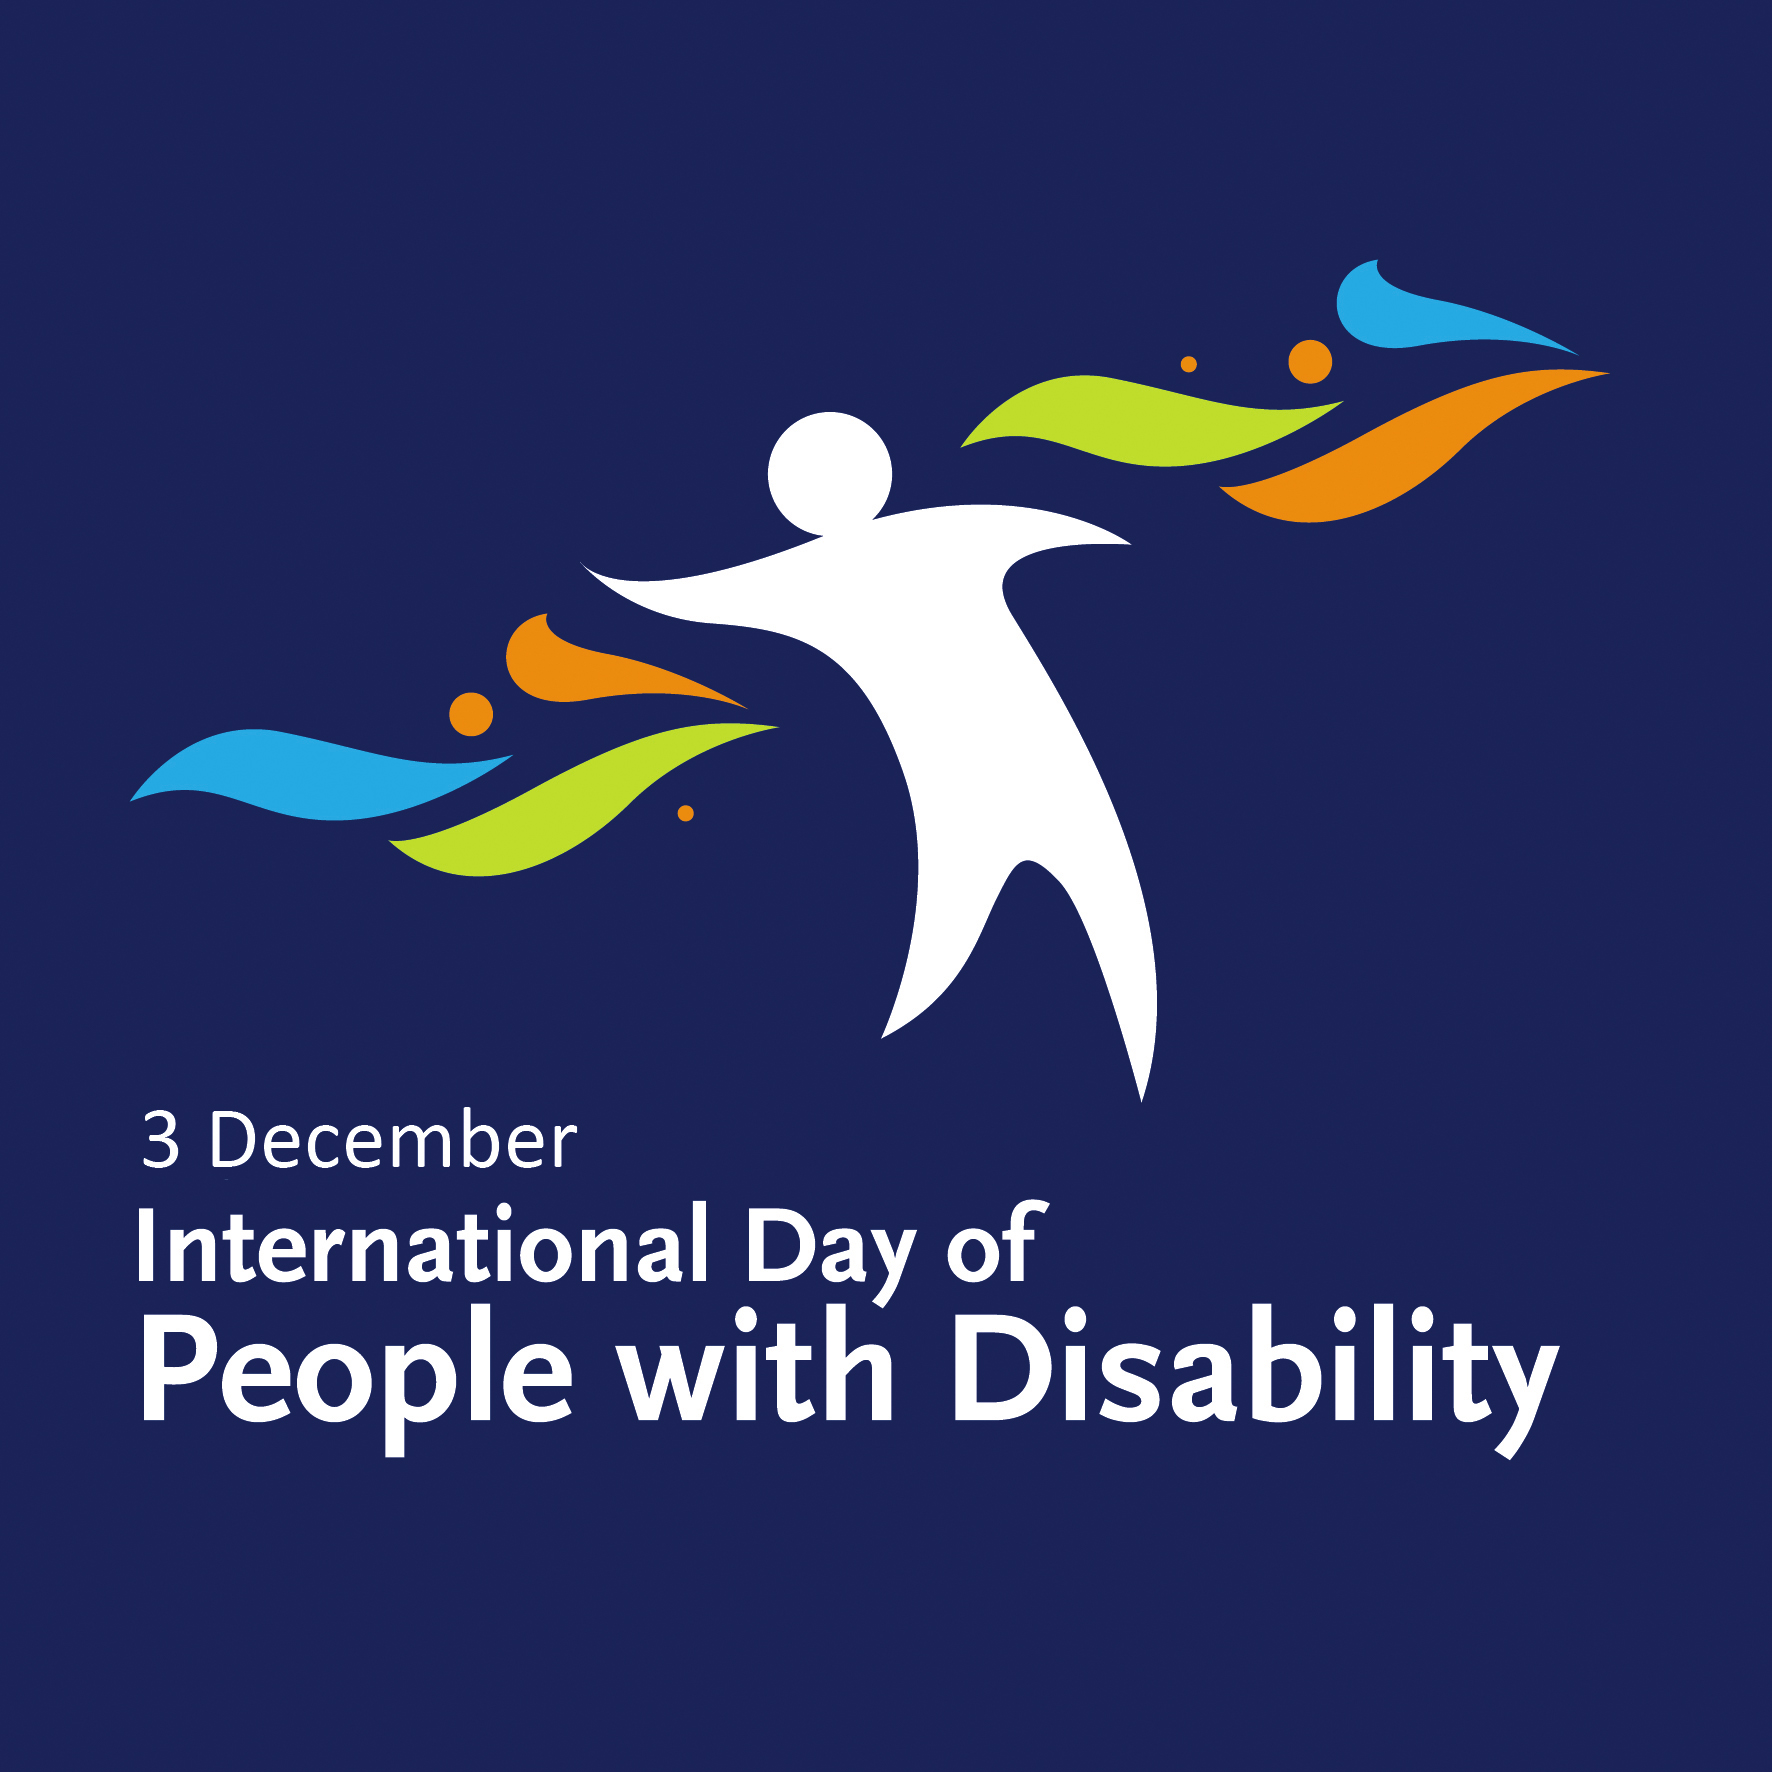 3 December International Day of People with Disability